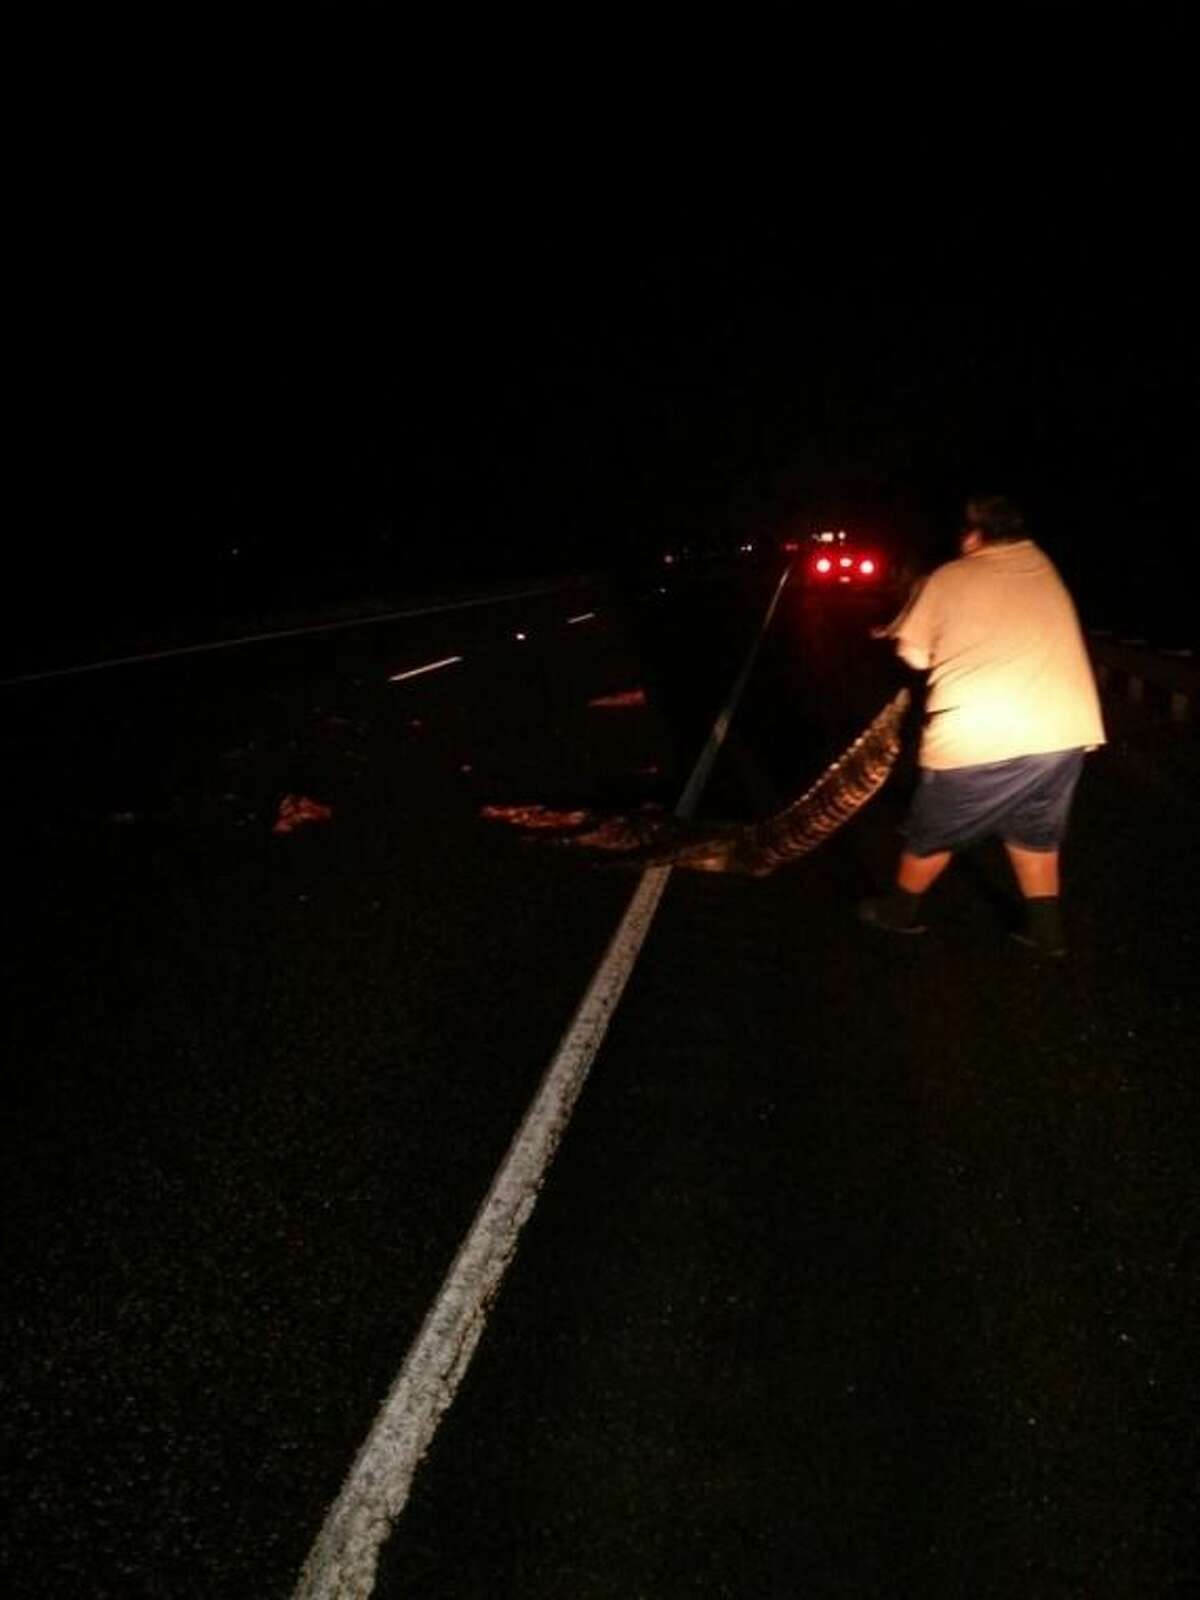 An alligator, estimated to have been around 12 feet long, is removed from US 59 south of Cleveland at the San Jacinto River Bridge. A Toyota Tundra driven by Michael Groh of Splendora struck and killed the alligator Wednesday night, Oct. 30. Groh pulled the reptile from the road to prevent problems for other motorists.